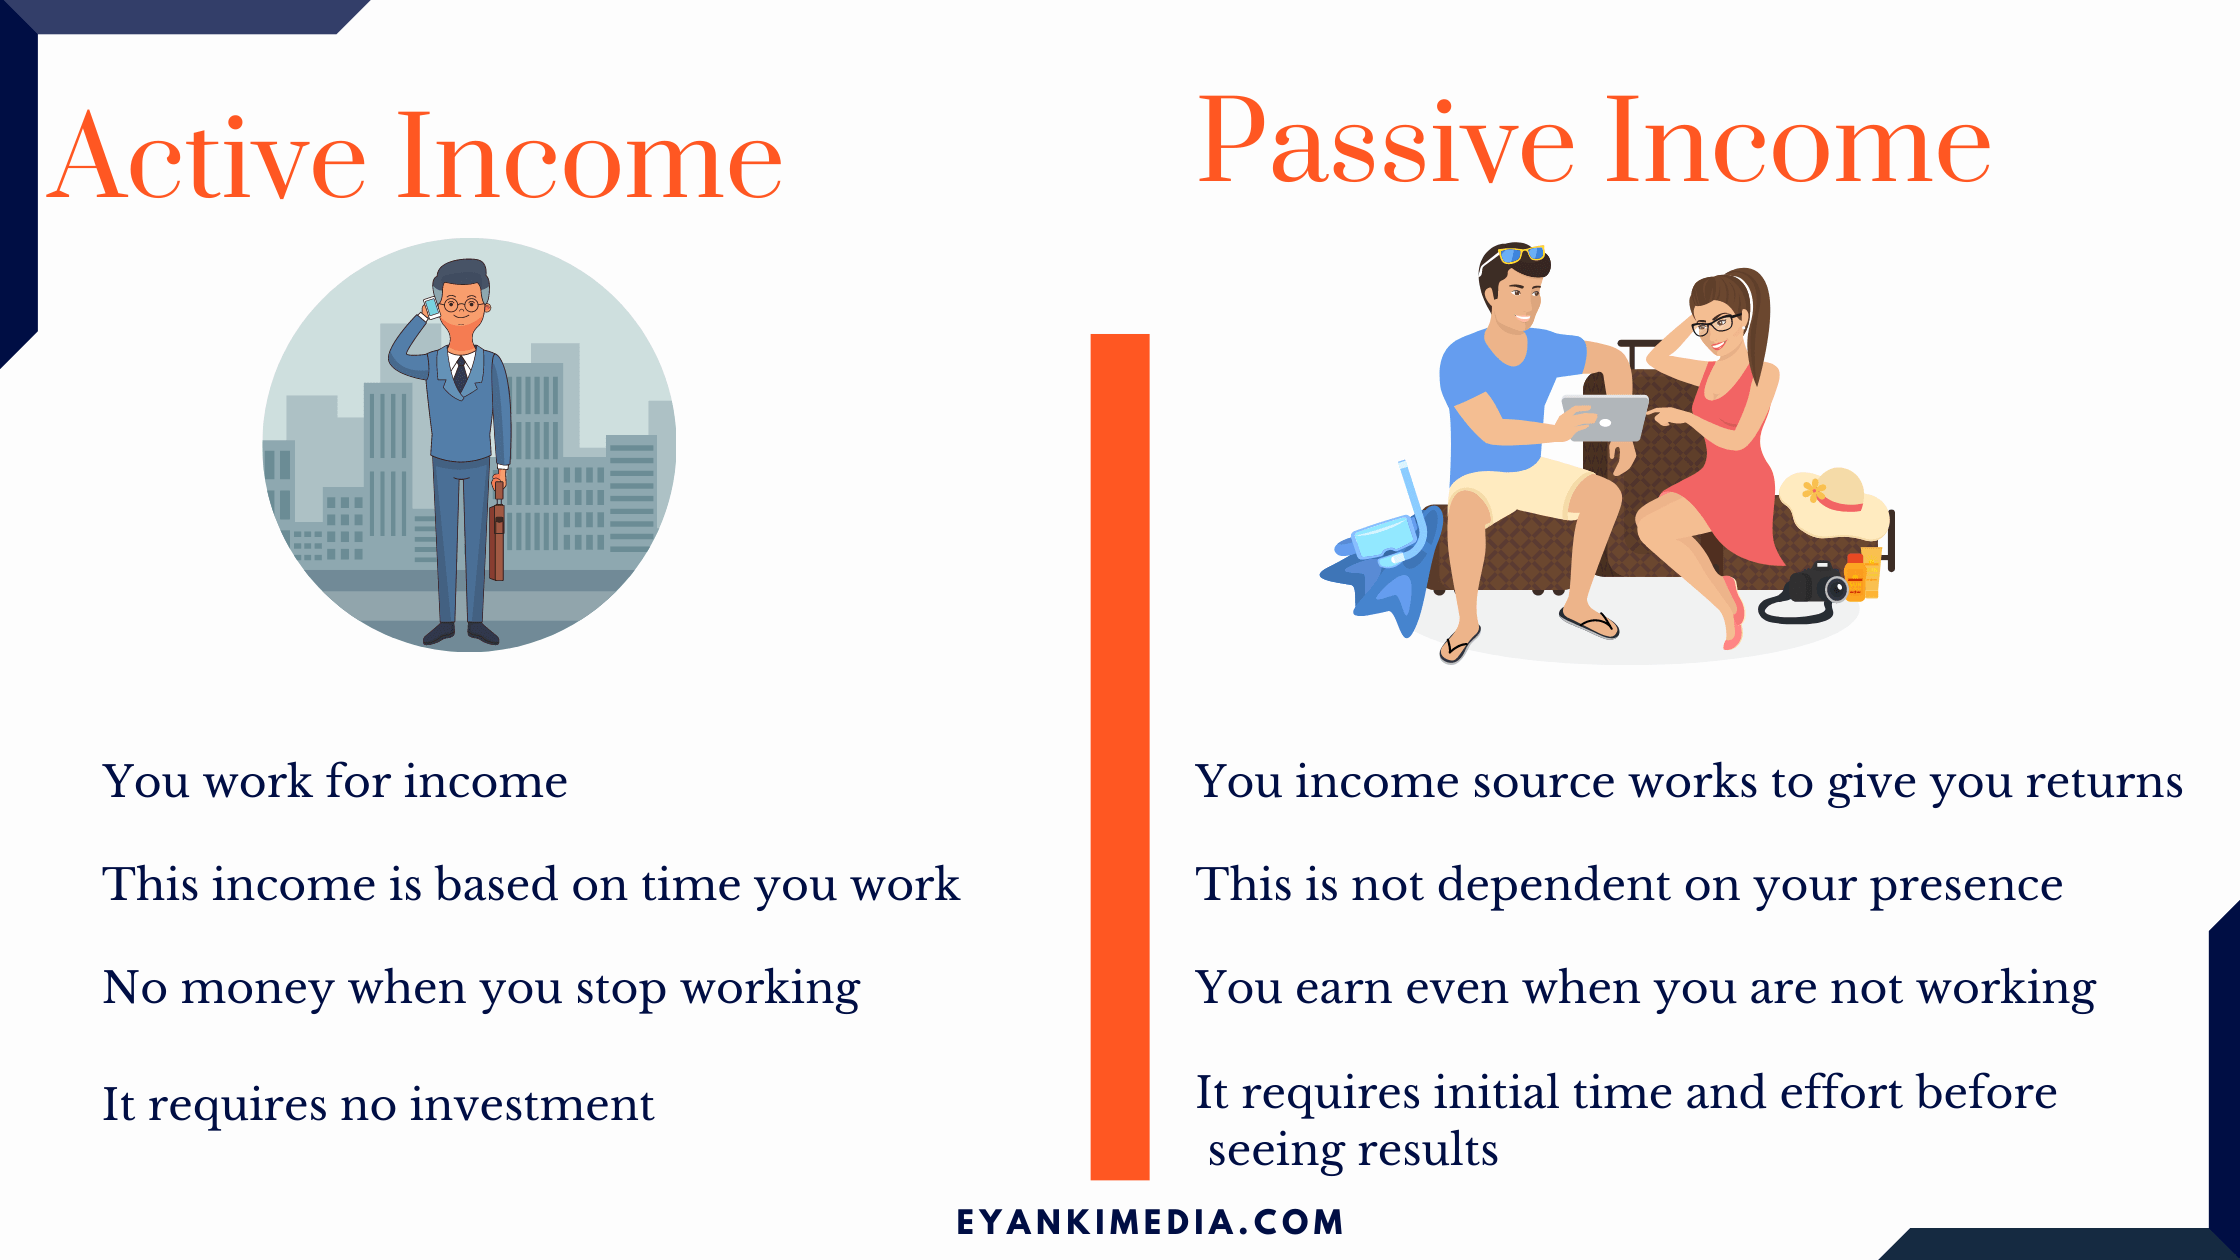 10 Best Passive Income Ideas That Work And Make Real Money